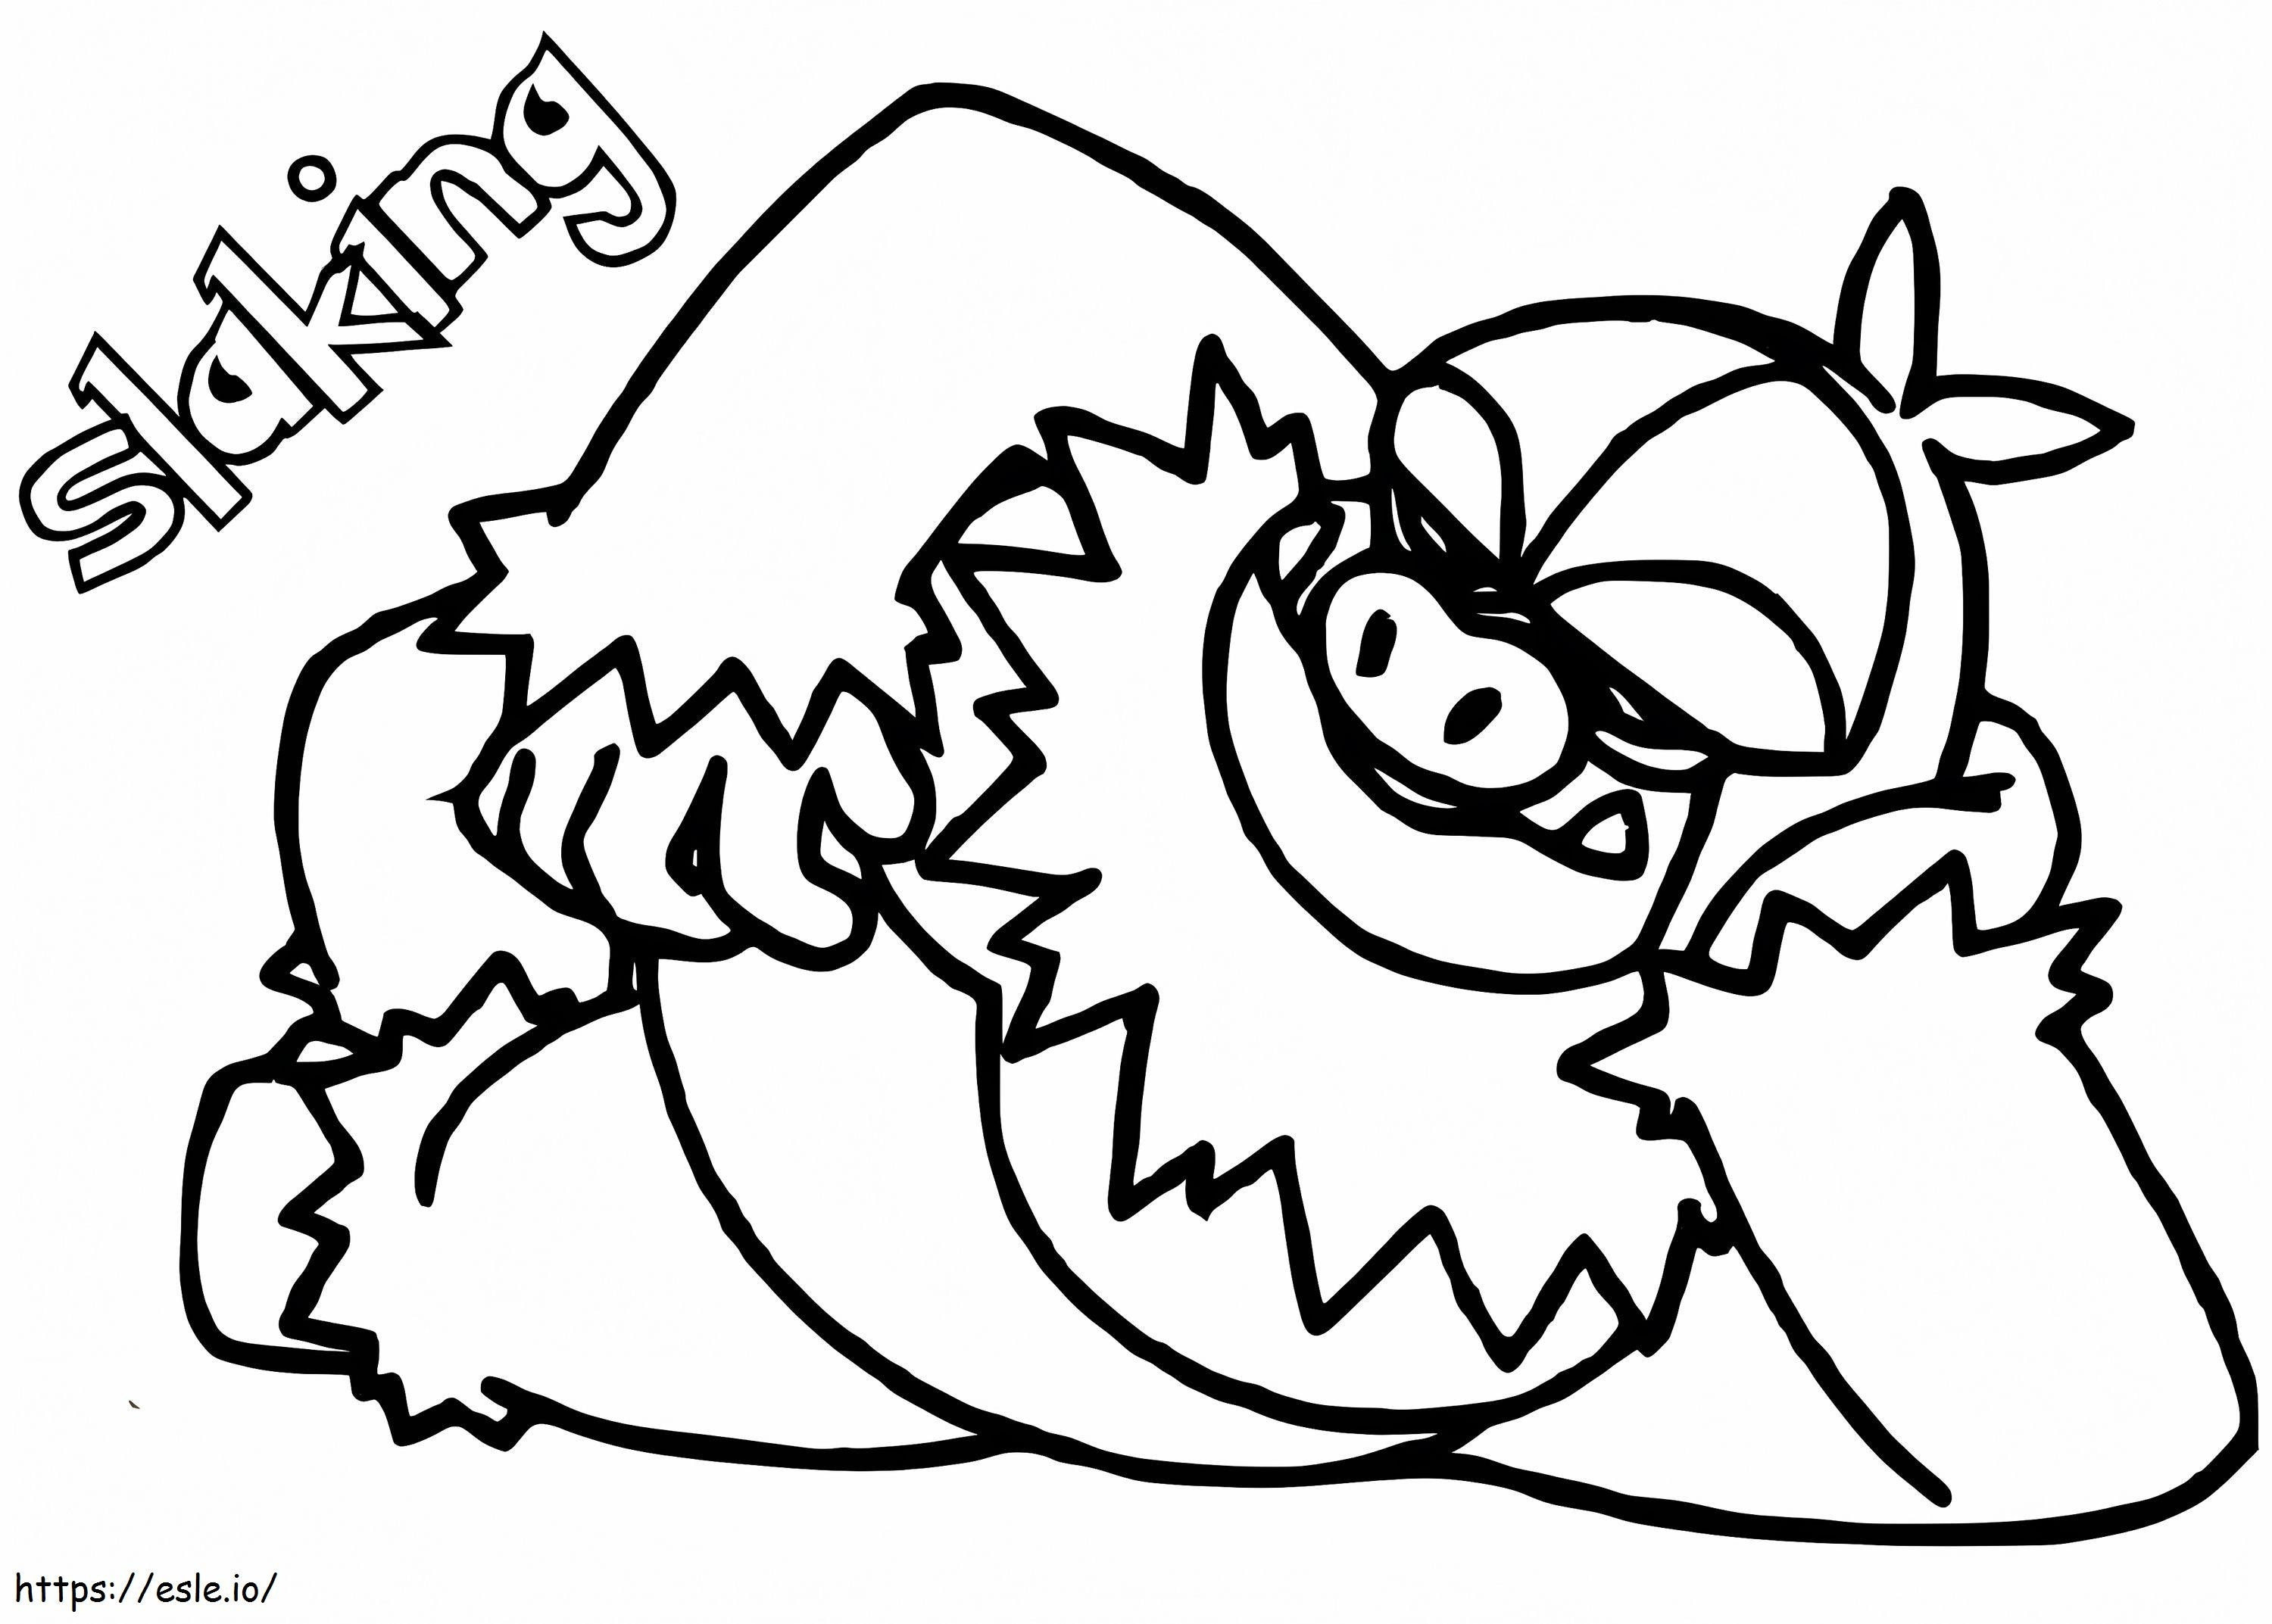 Printable Slaking coloring page